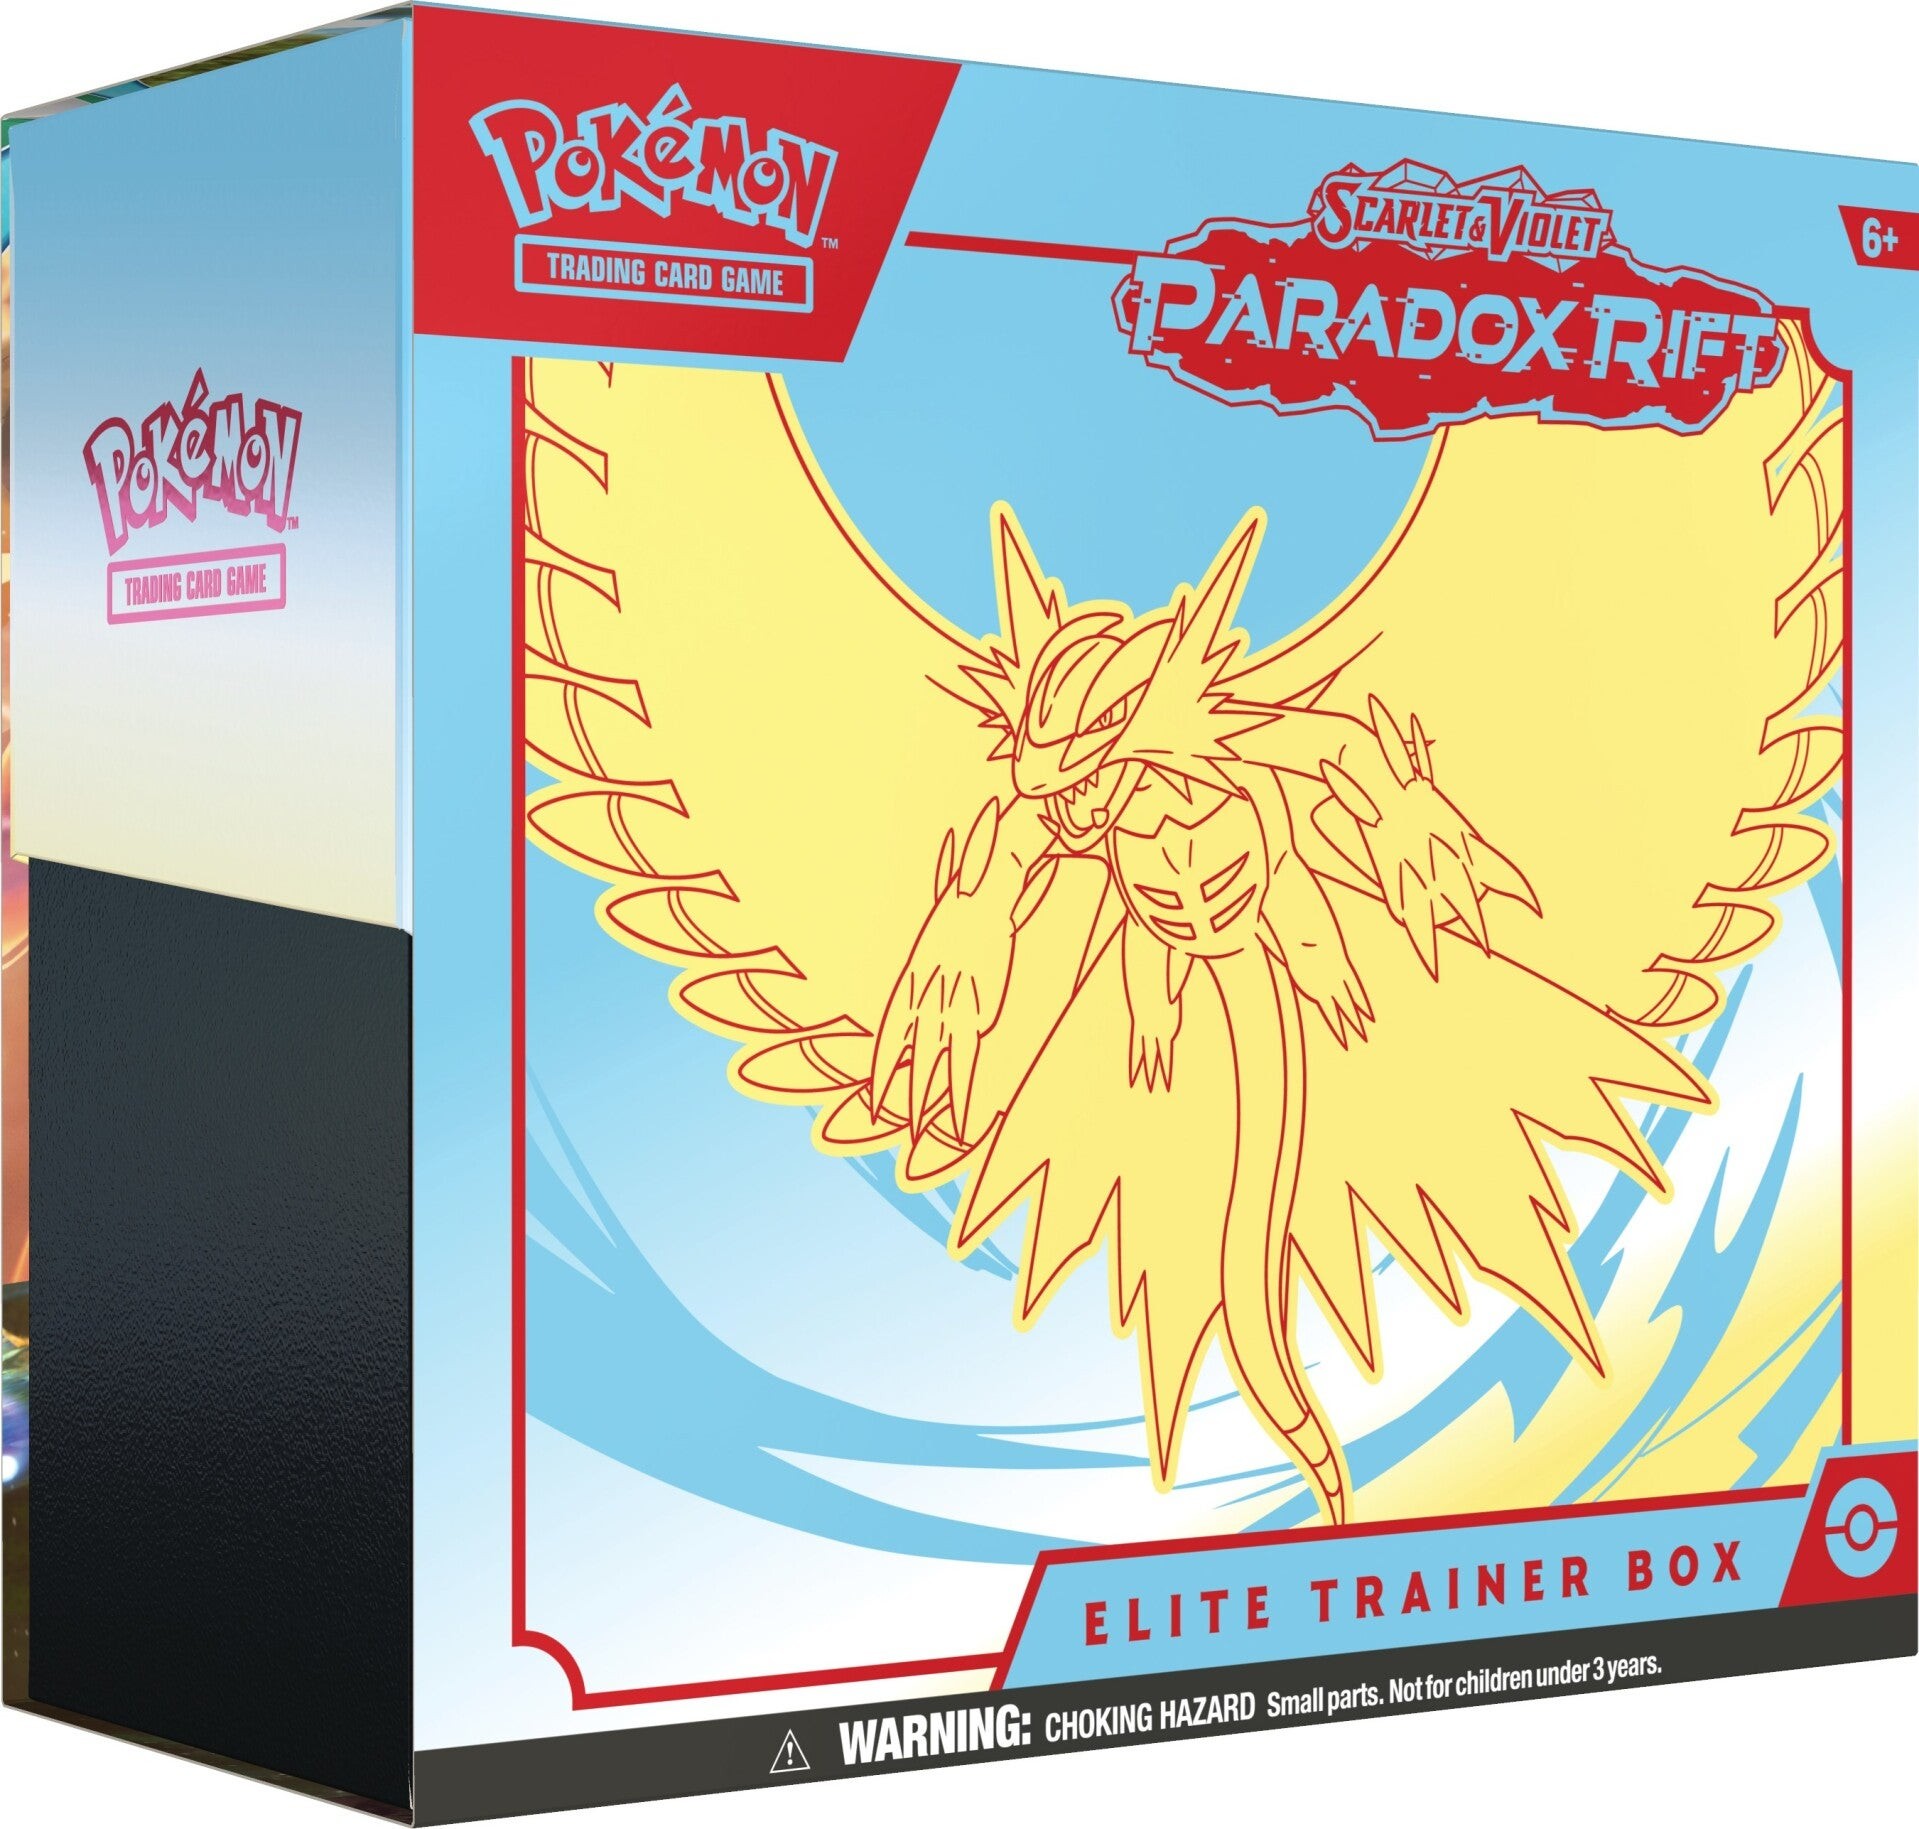 The Best Cards in Pokemon TCG Paradox Rift - Esports Illustrated